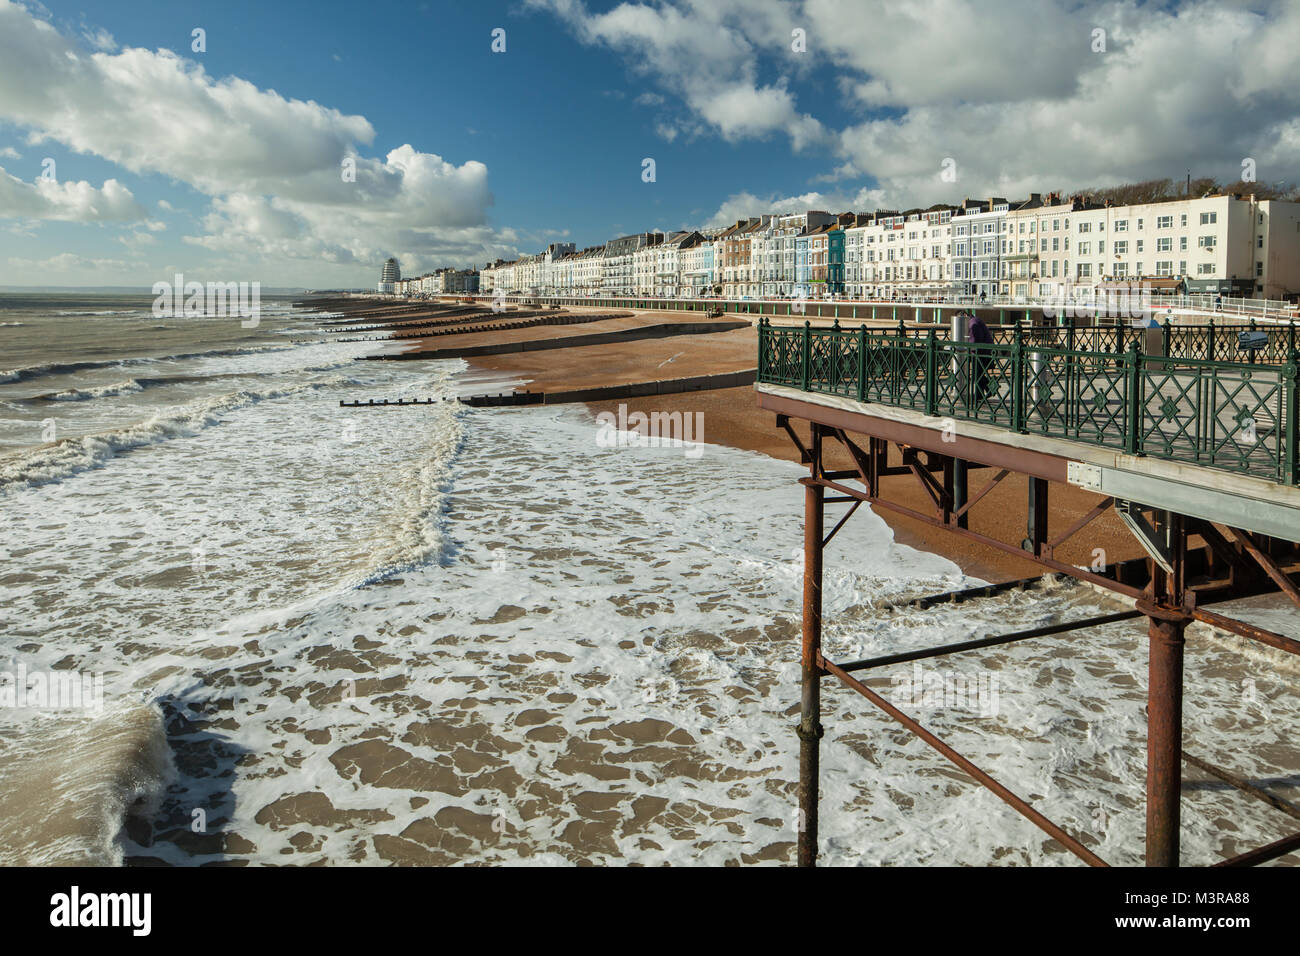 Hastings seafront, East Sussex, England. Stock Photo